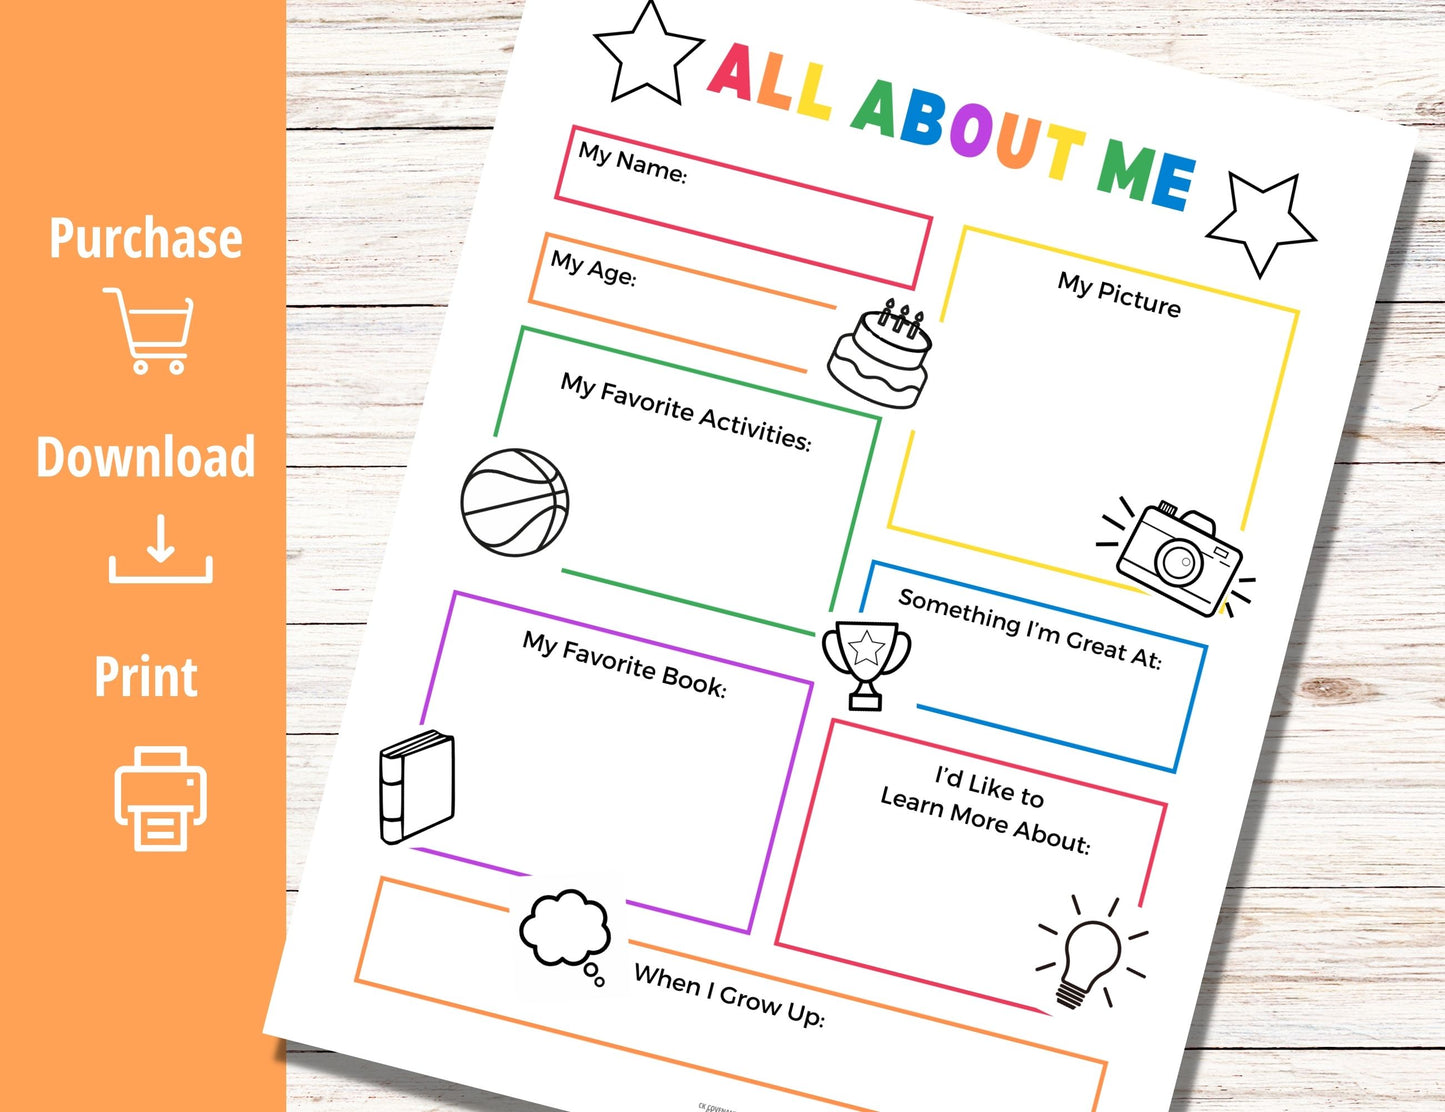 All About Me Activity - Full Color and Black & W